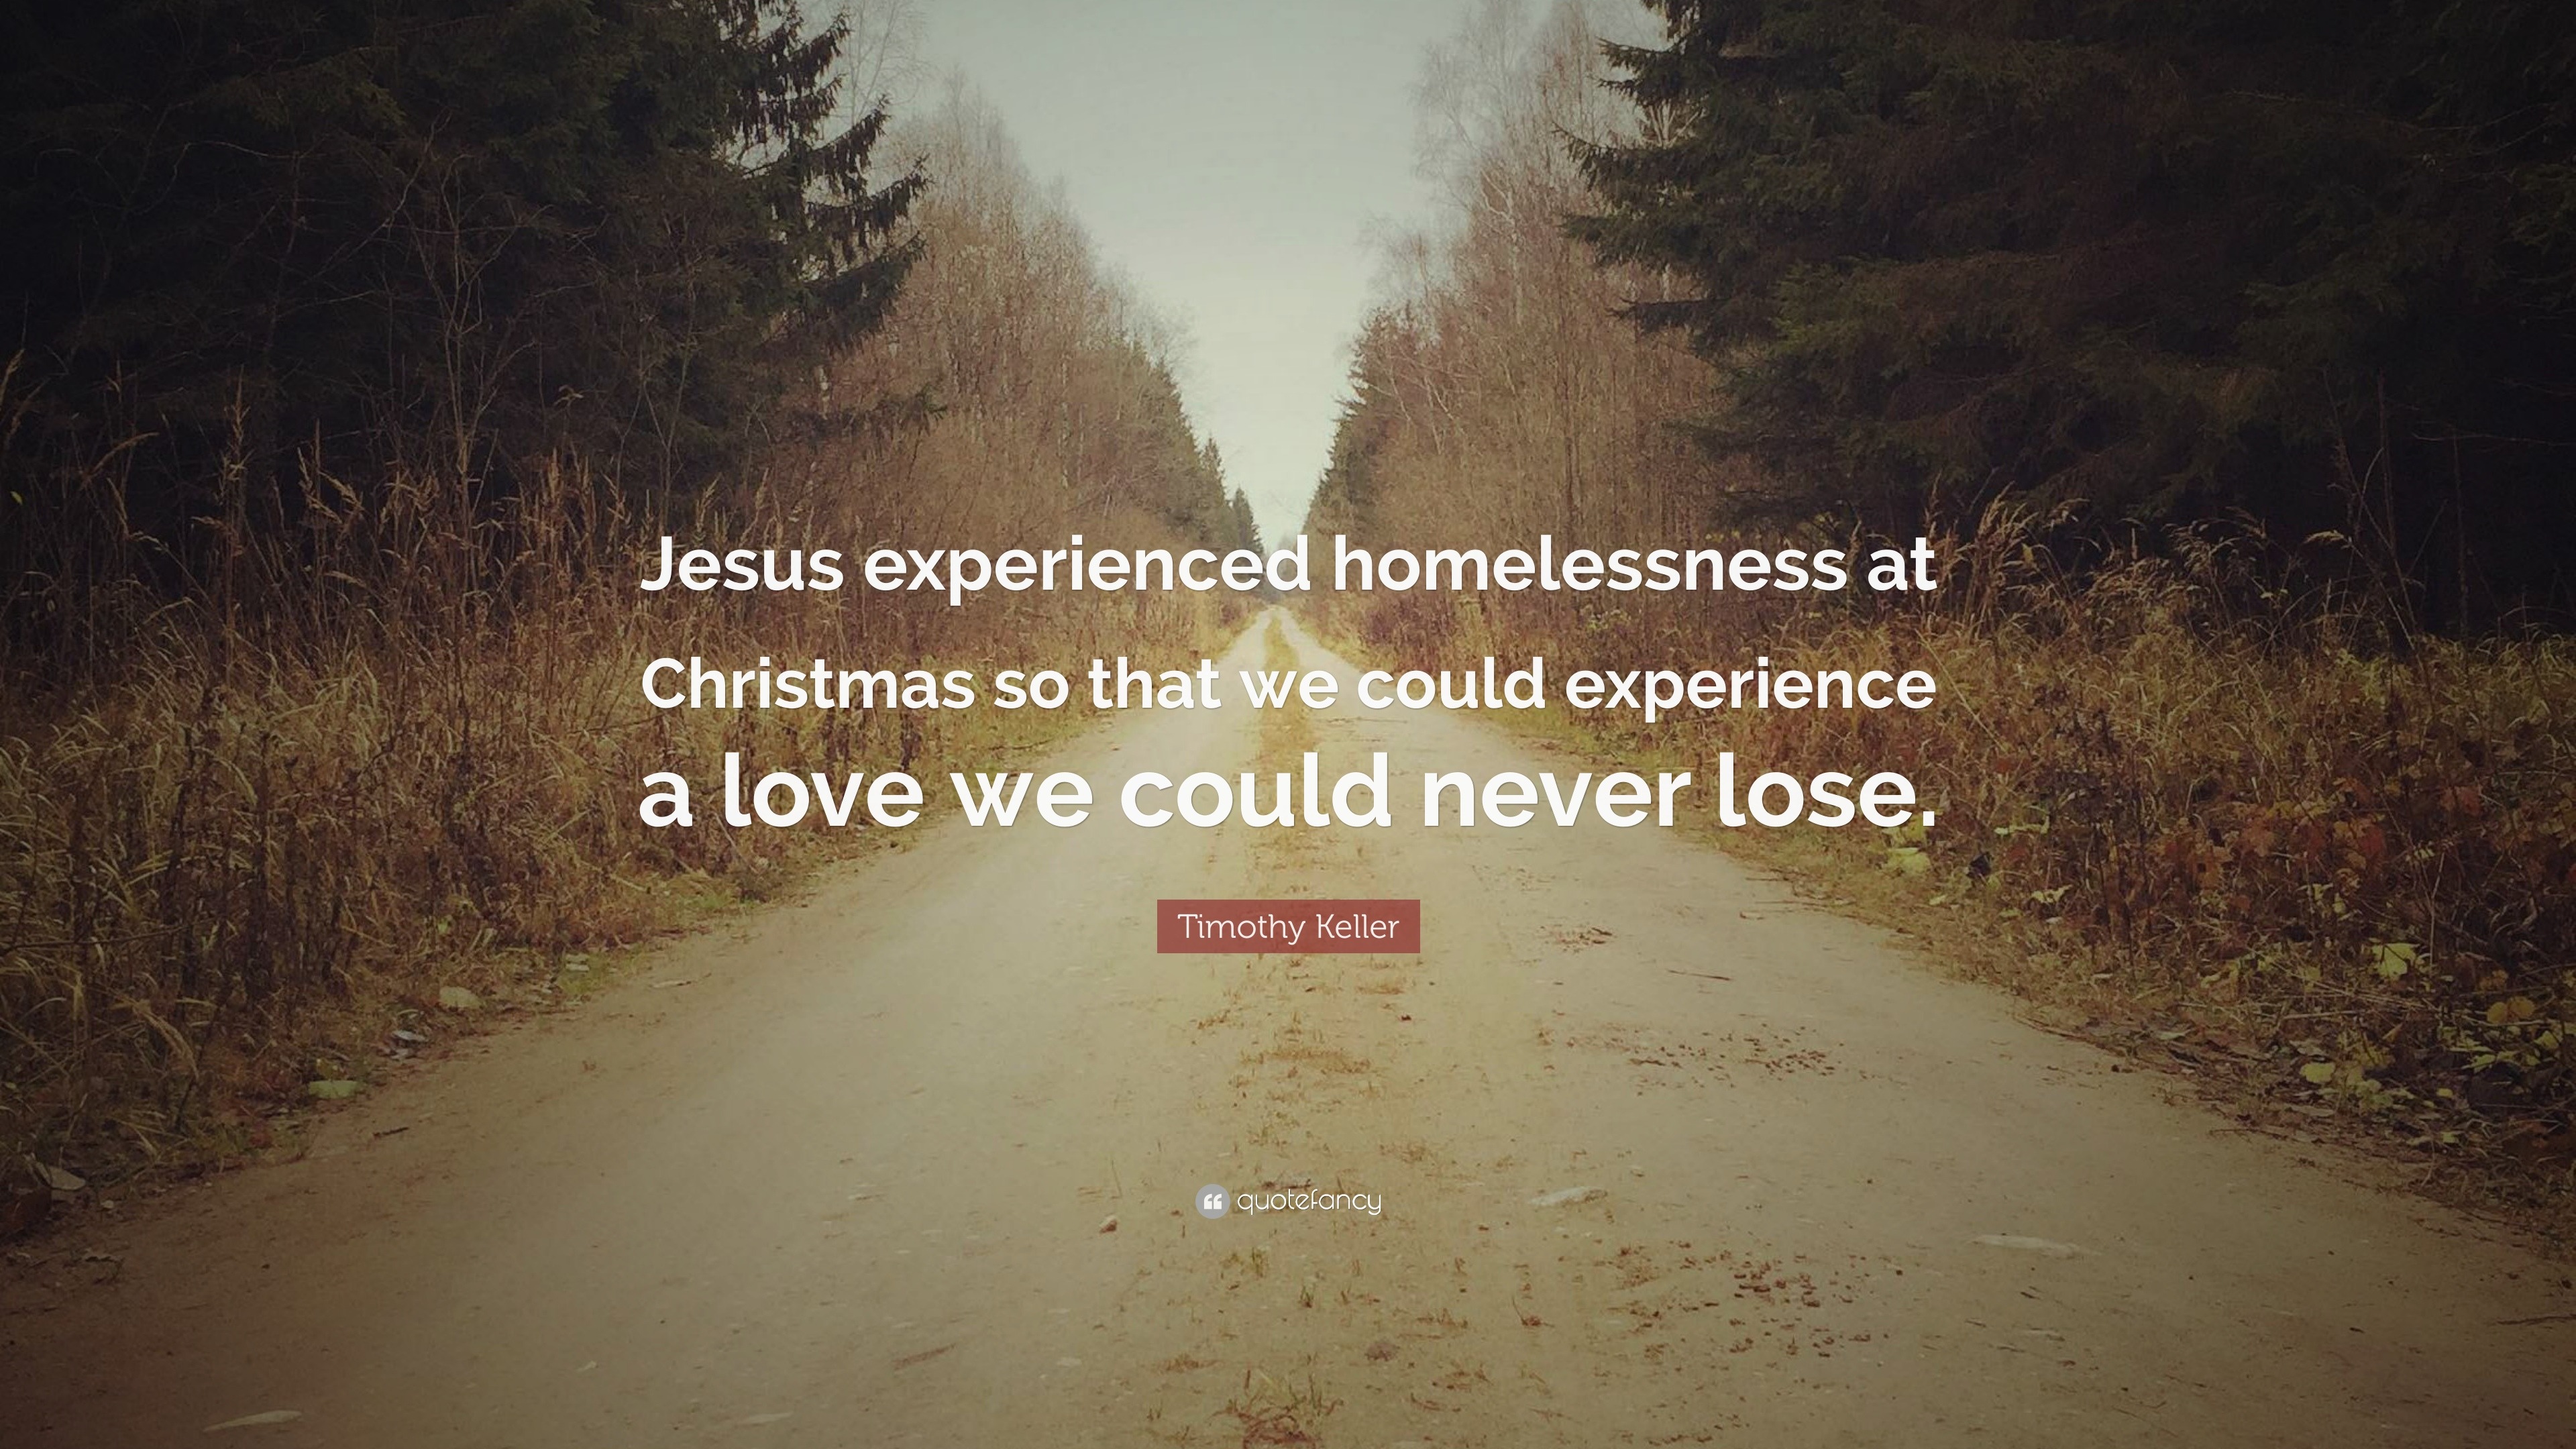 Quotes About Homelessness Timothy Keller Quote “Jesus Experienced Homelessness At Christmas